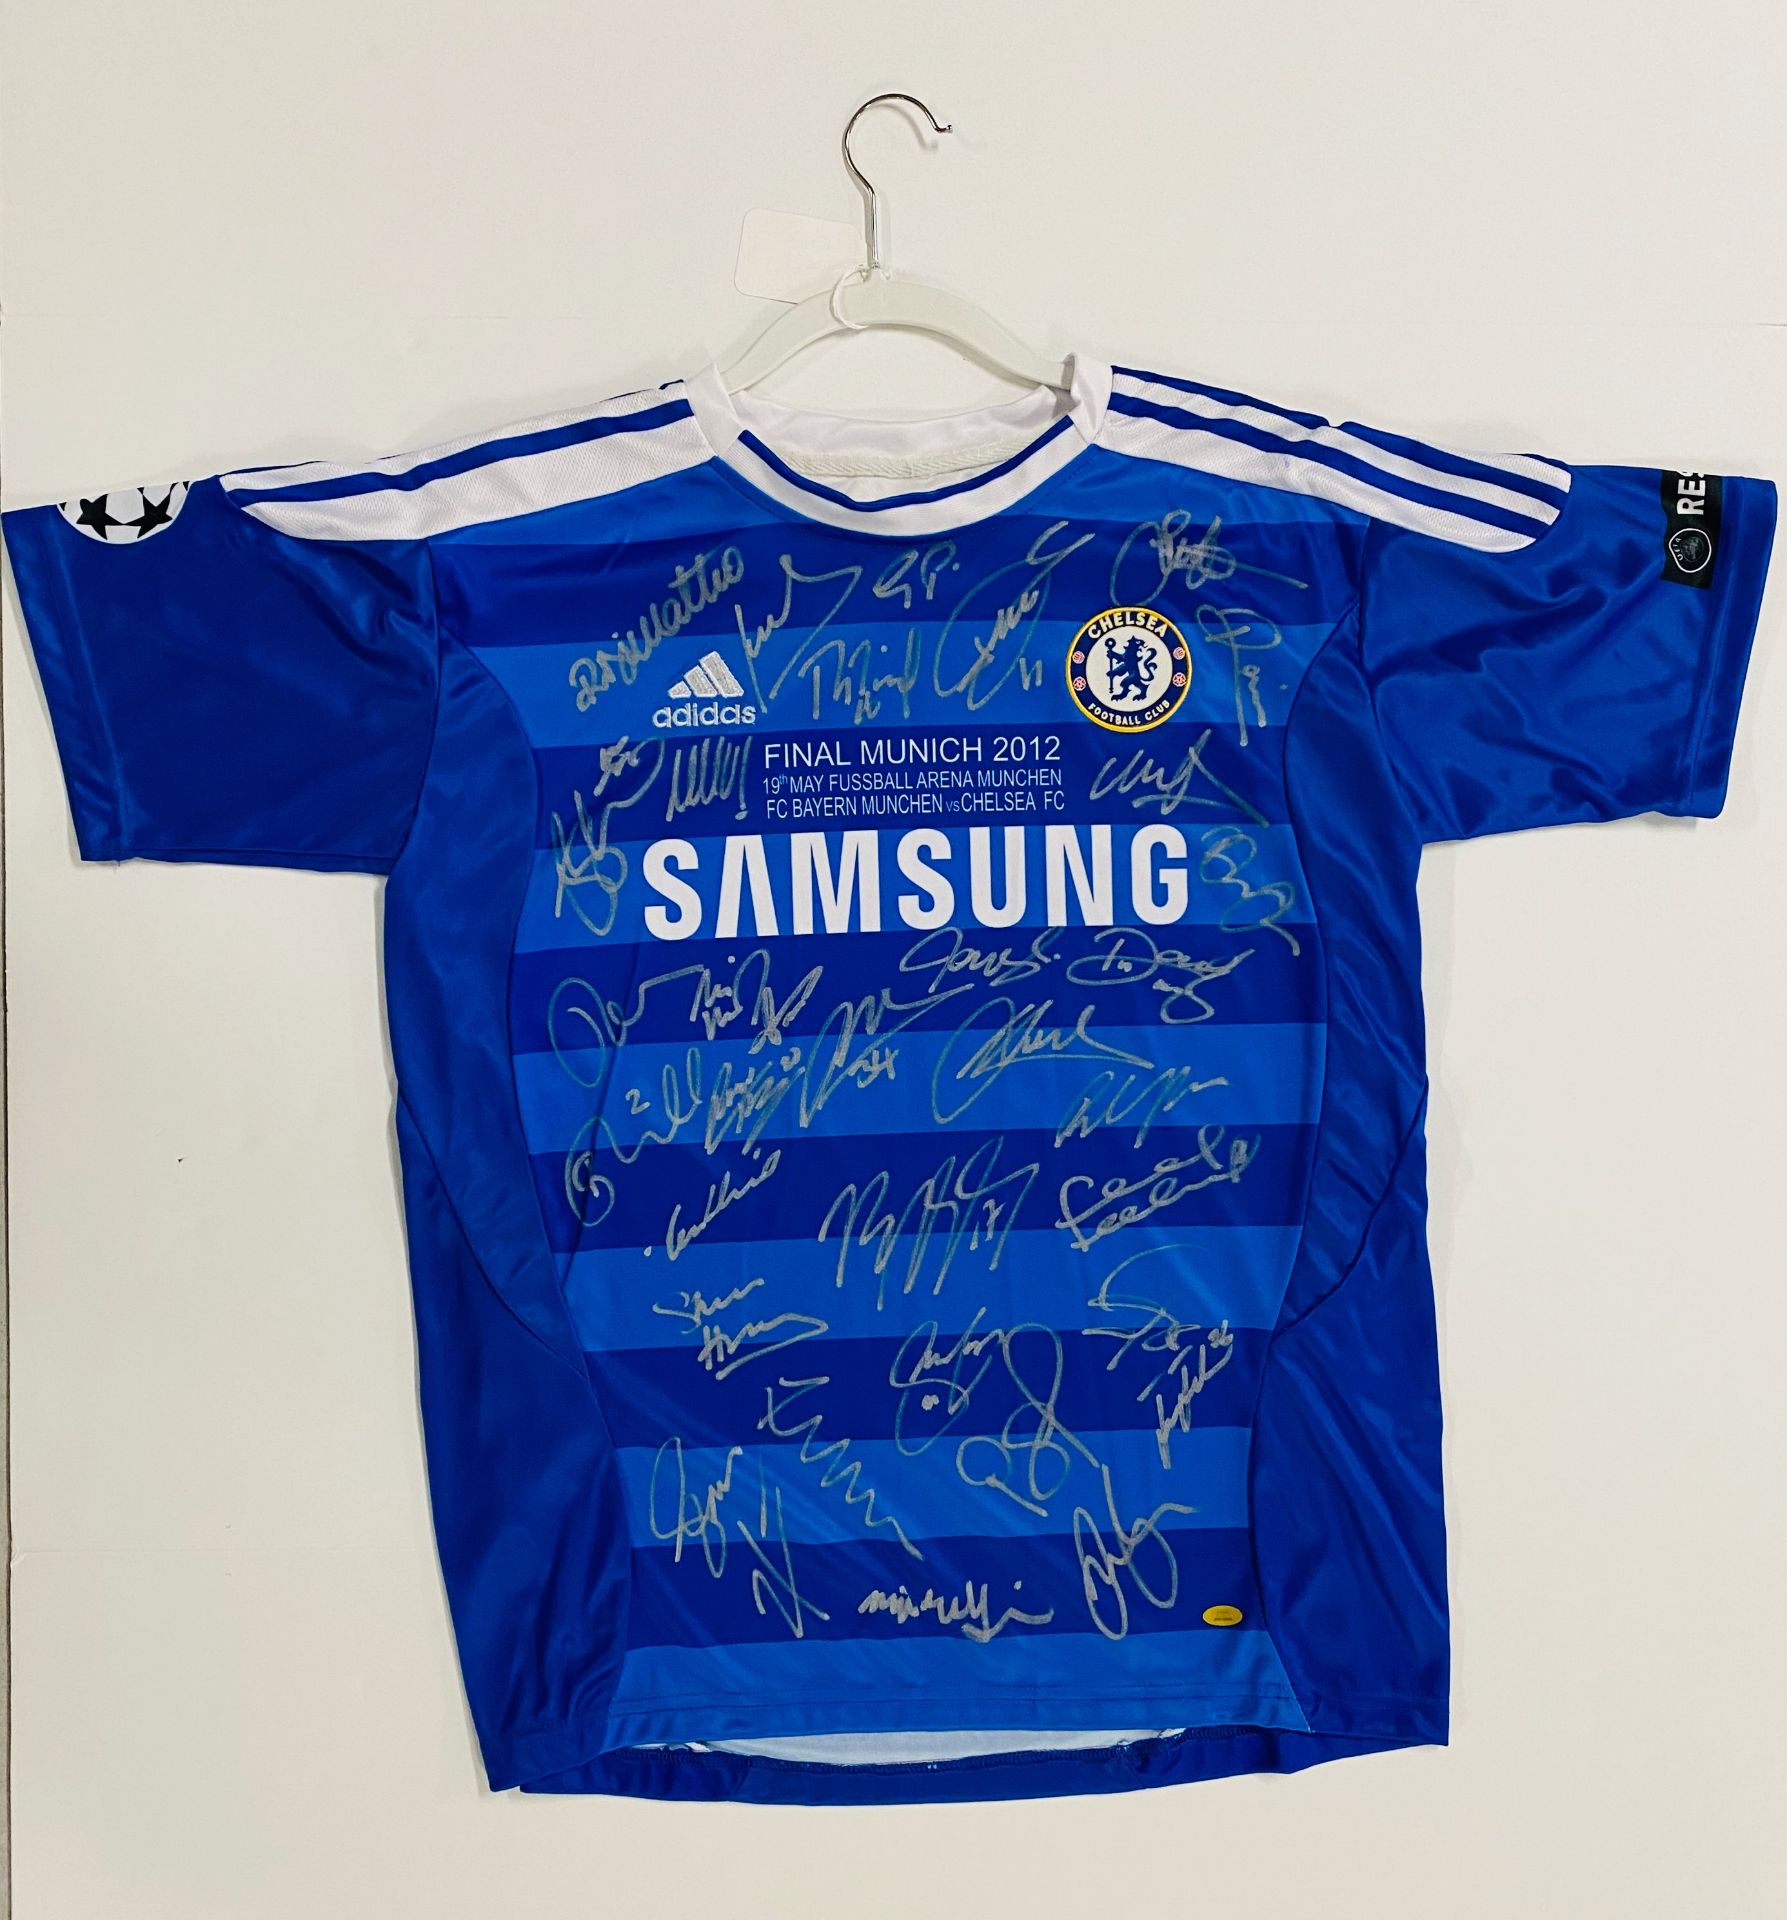 Chelsea 2011/12 Champions League winners signed jersey